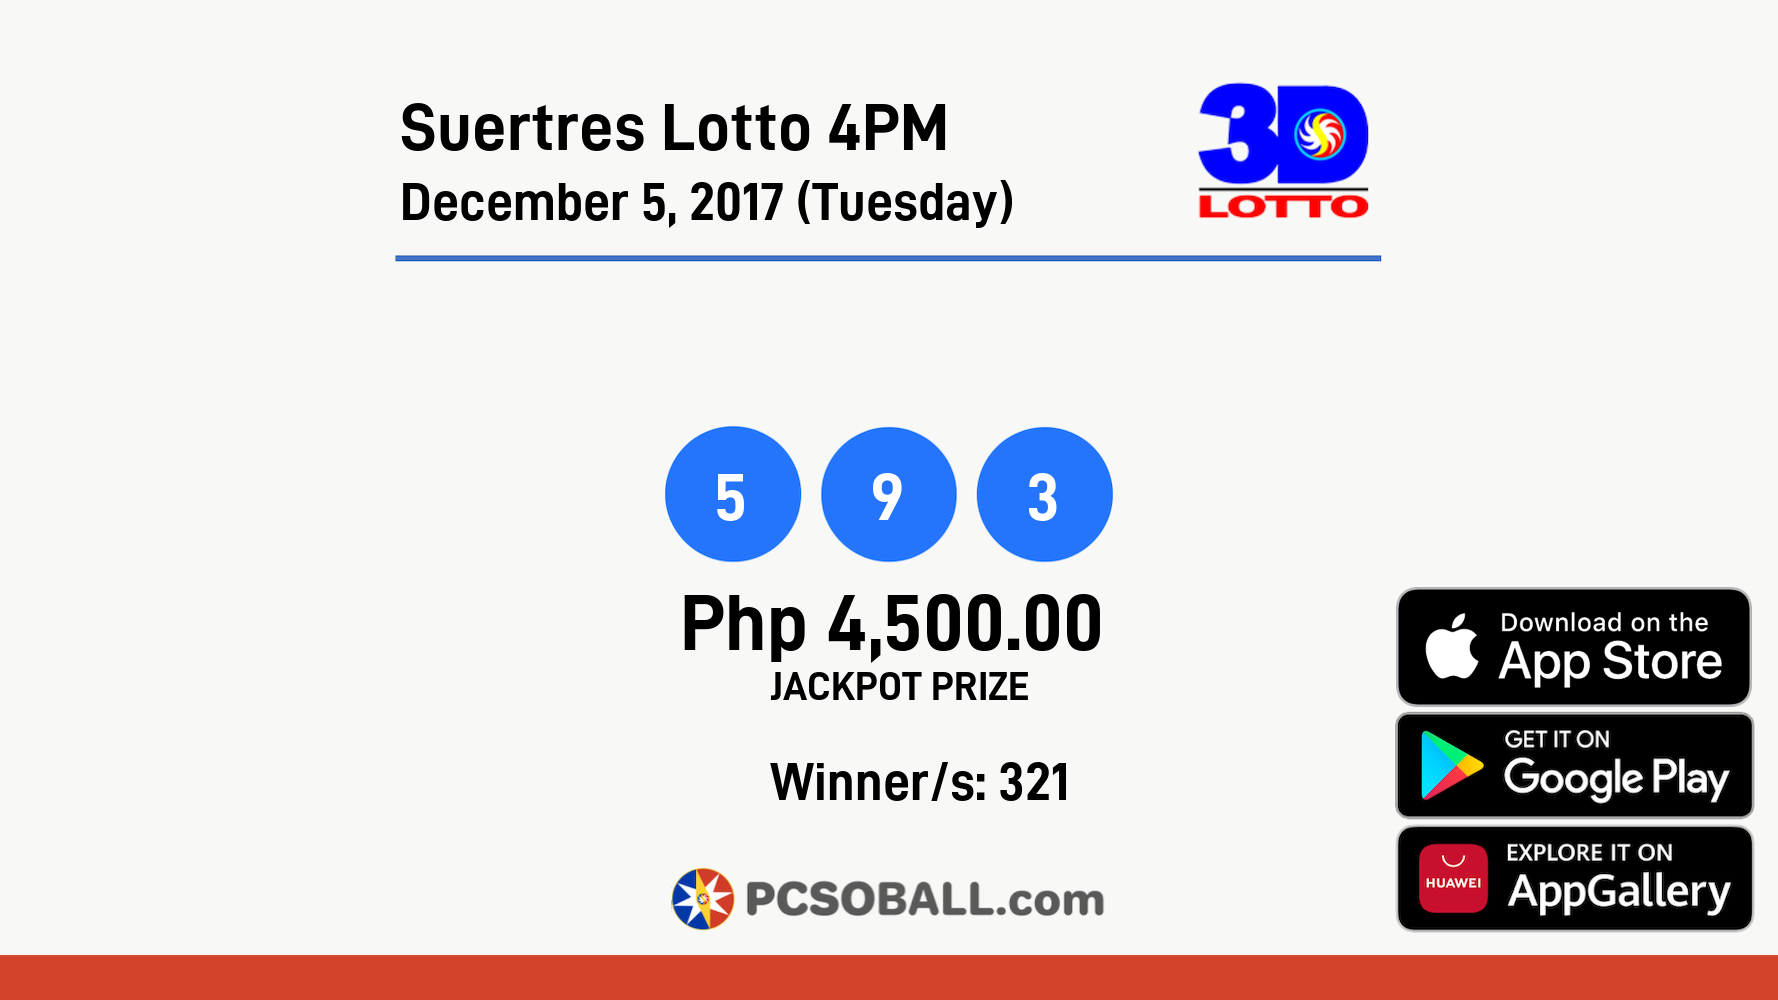 Suertres Lotto 4PM December 5, 2017 (Tuesday) Result